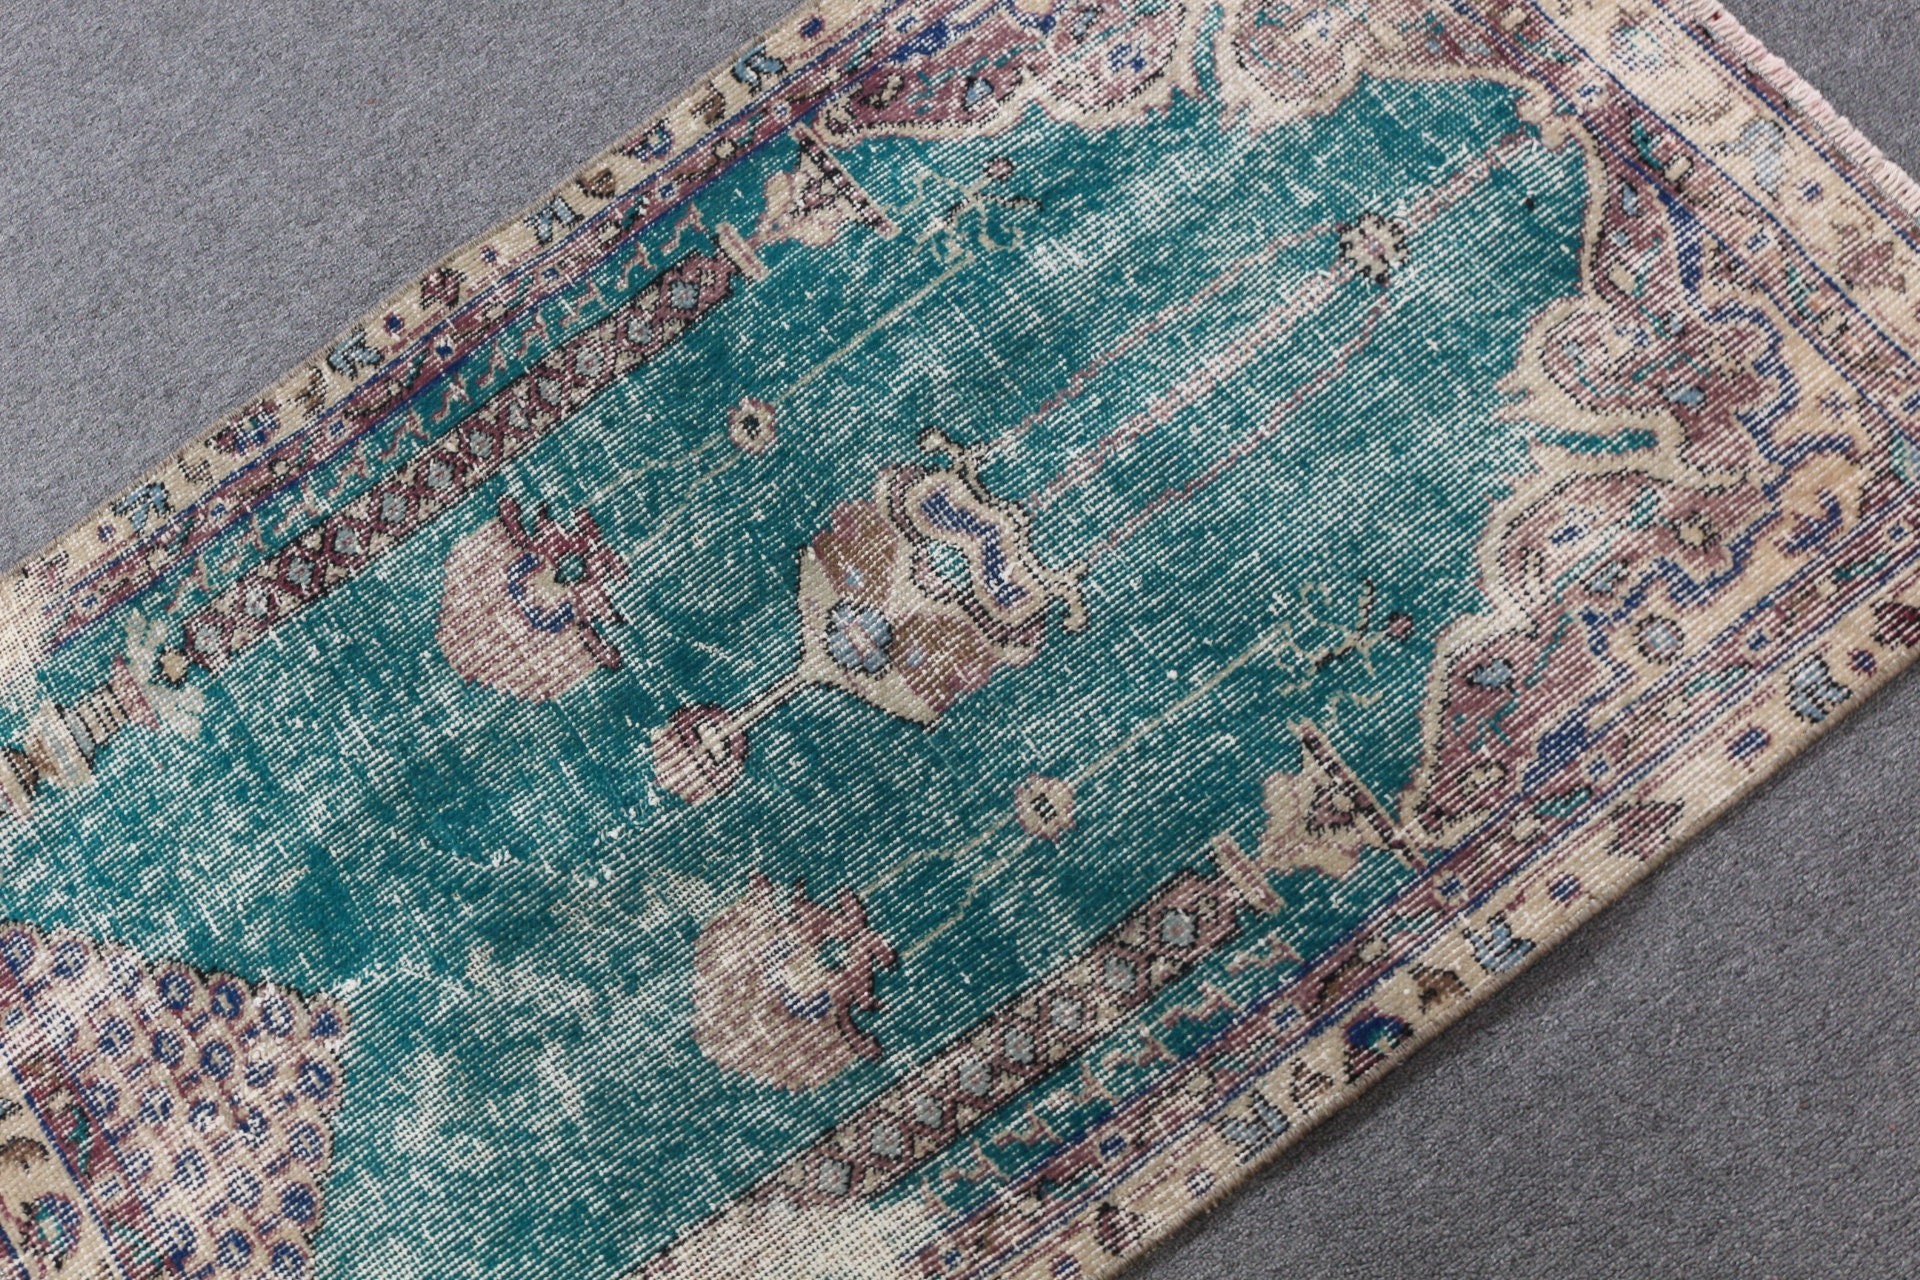 Vintage Rug, Antique Rug, Kitchen Rug, Rugs for Bedroom, Turkish Rugs, Bedroom Rugs, 2.4x4.1 ft Small Rug, Green Antique Rug, Entry Rugs